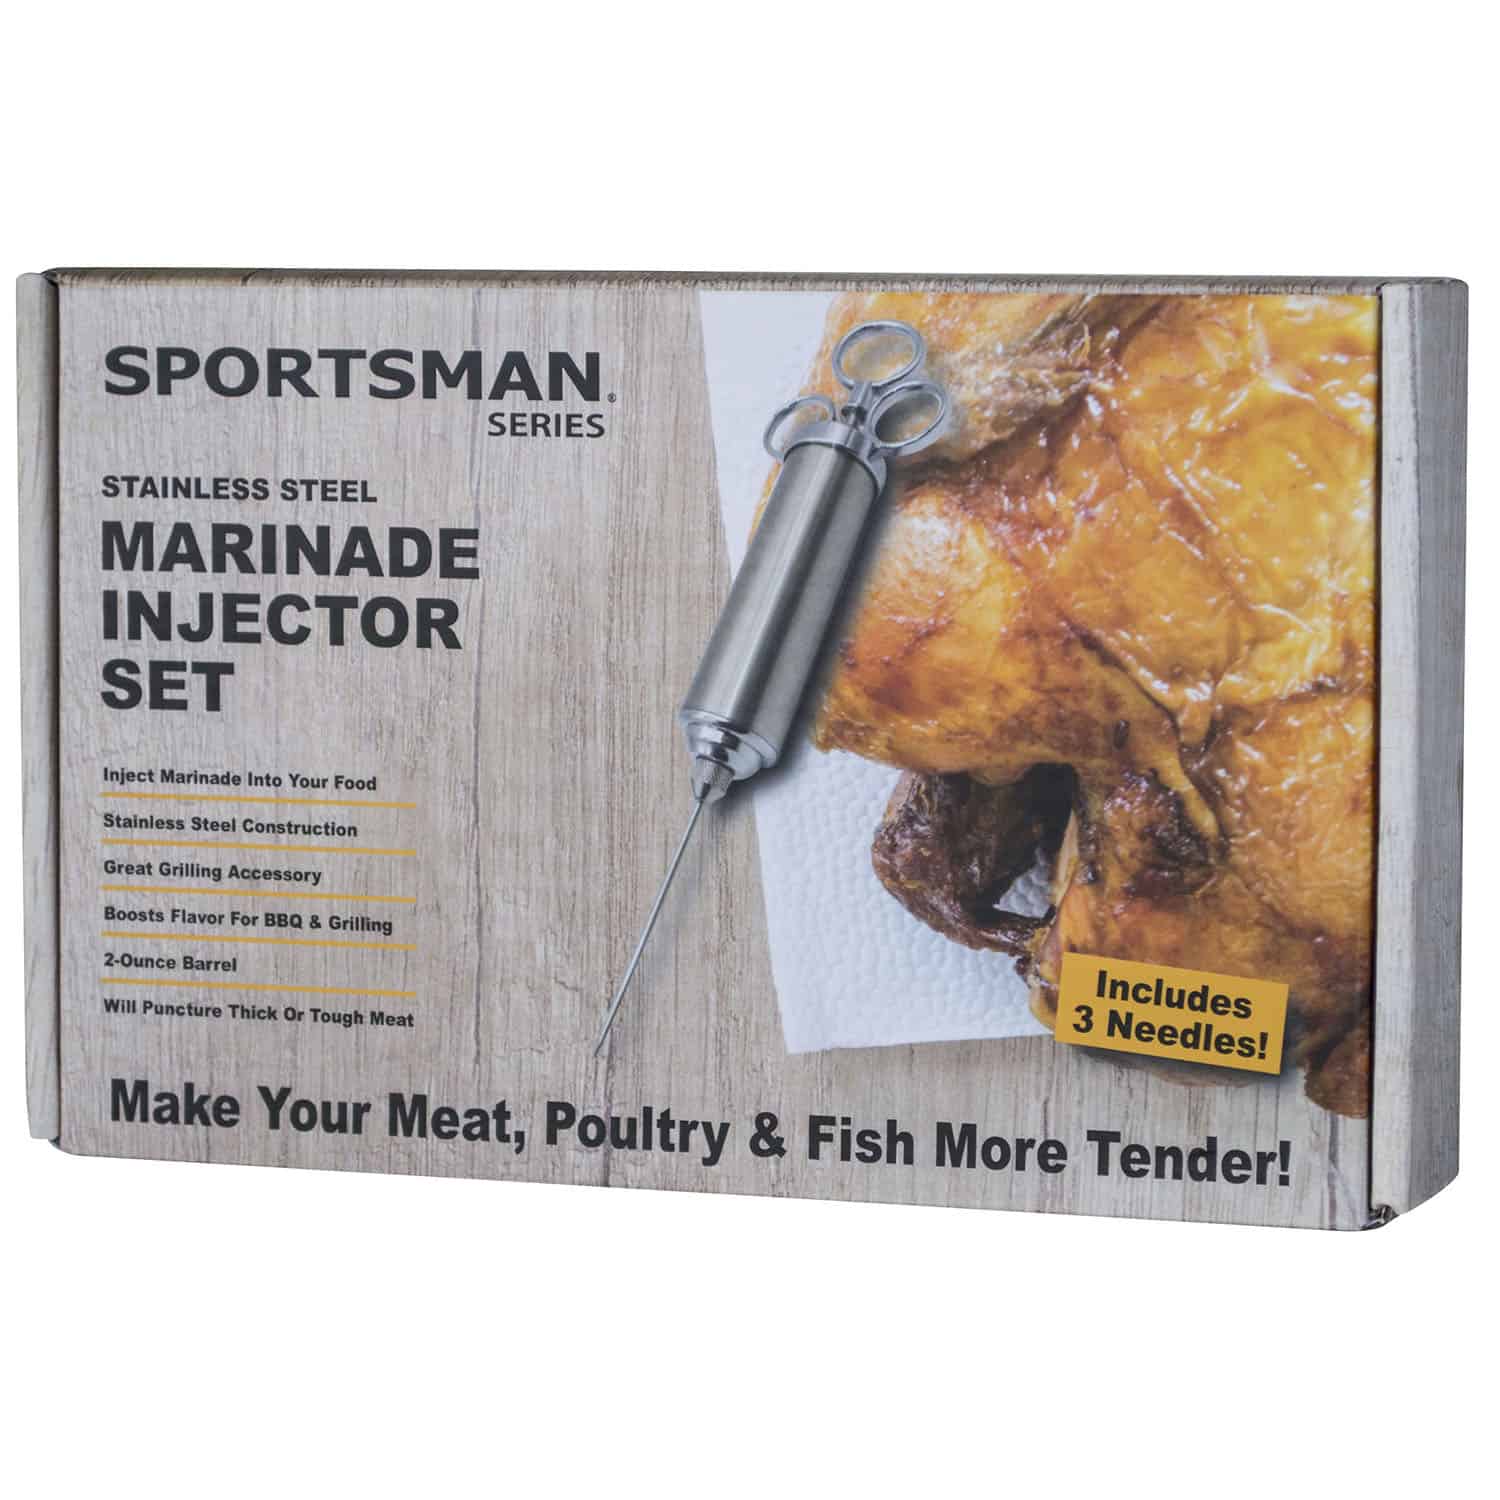 What is a Marinade Injector and How Do I Use It?